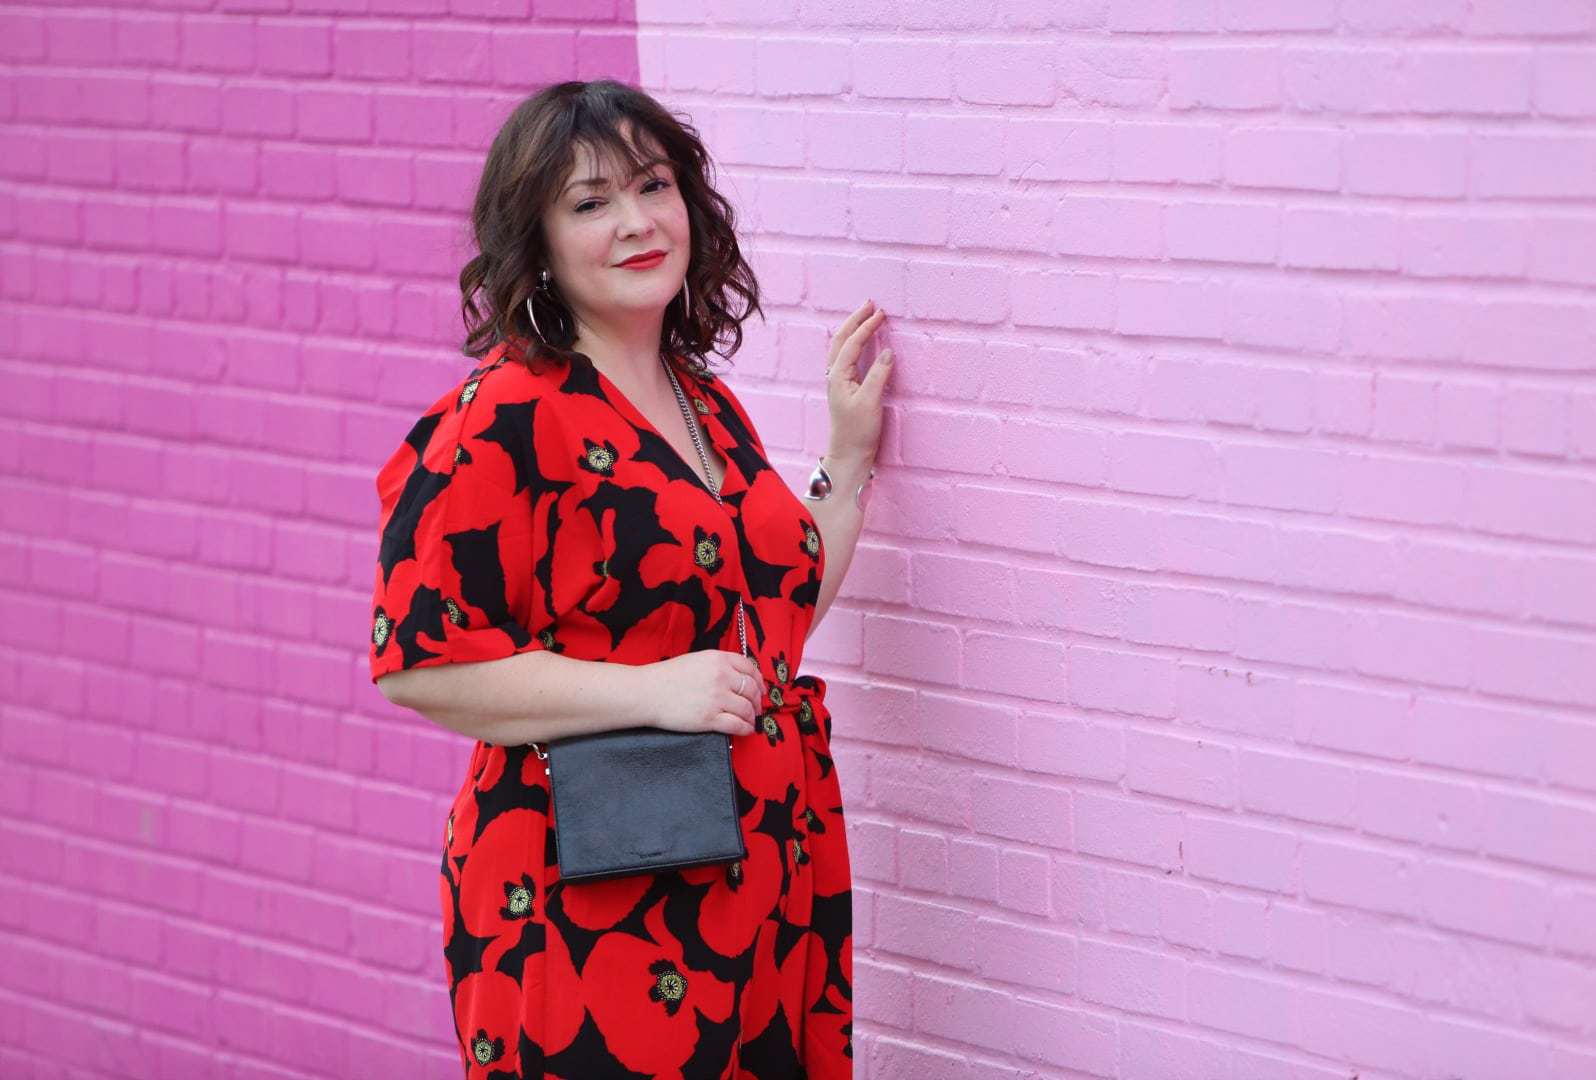 Wardrobe Oxygen in a red floral jumpsuit from ELOQUII with Rothy's flats